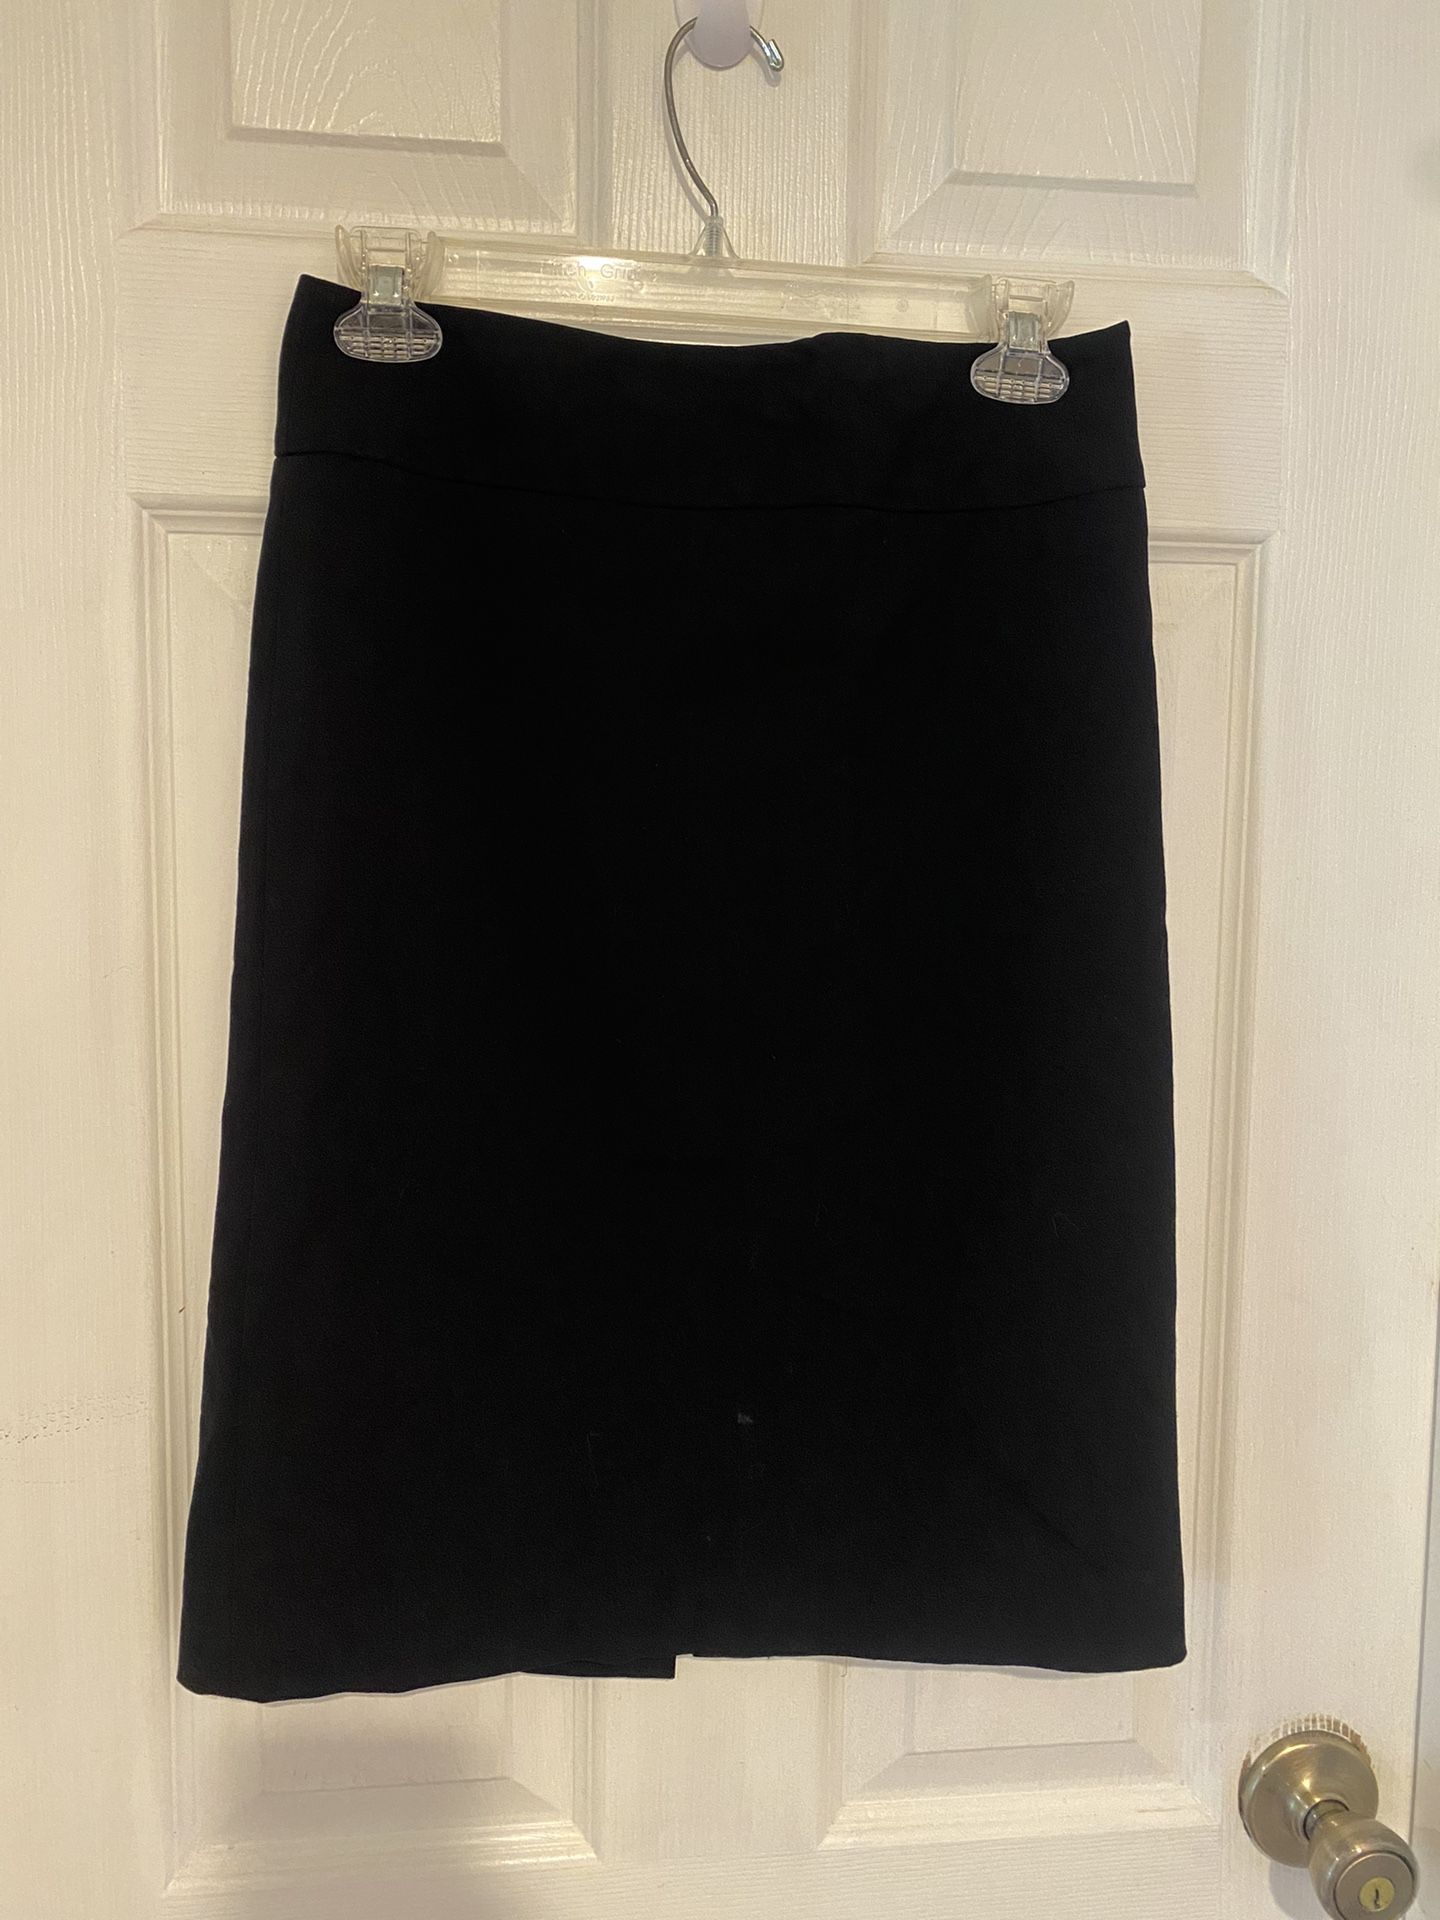 Size 0 black lined pencil skirt by Banana Republic Stretch fit